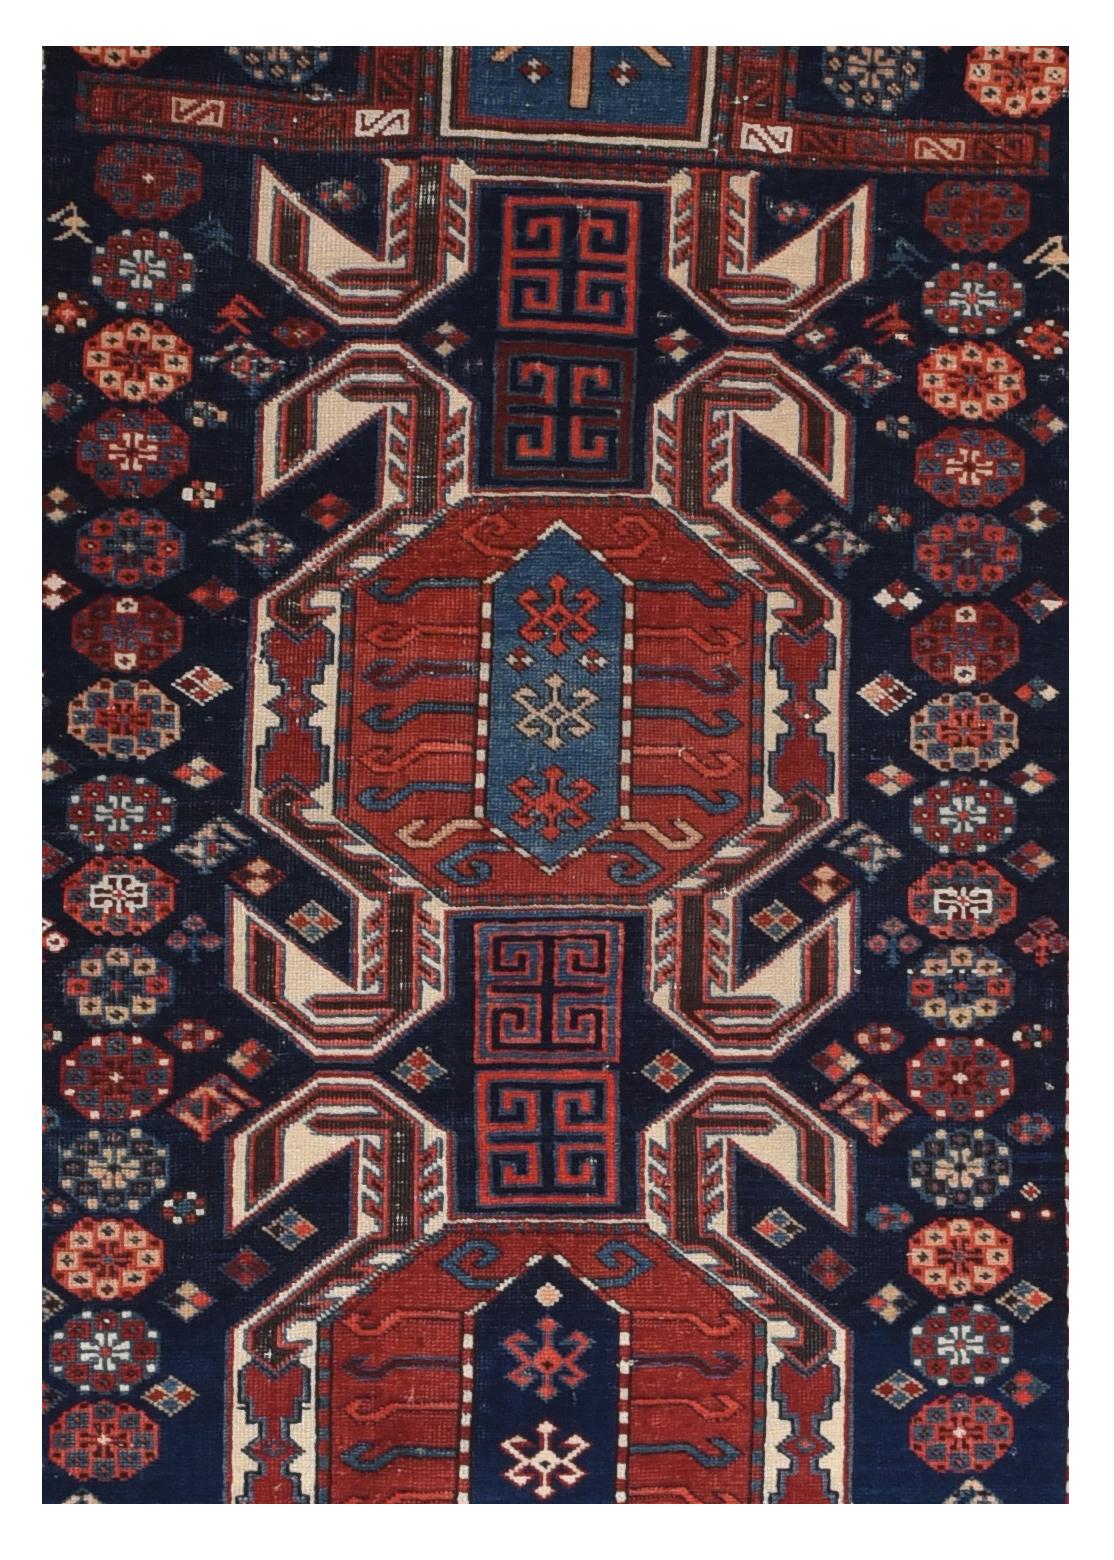 Shirvan rug, floor covering handmade in the Shirvan region of Azerbaijan in the southeastern Caucasus. With the exception of a group of rugs woven in the vicinity of Baku, most Shirvans are found in small sizes, with examples from the southern part